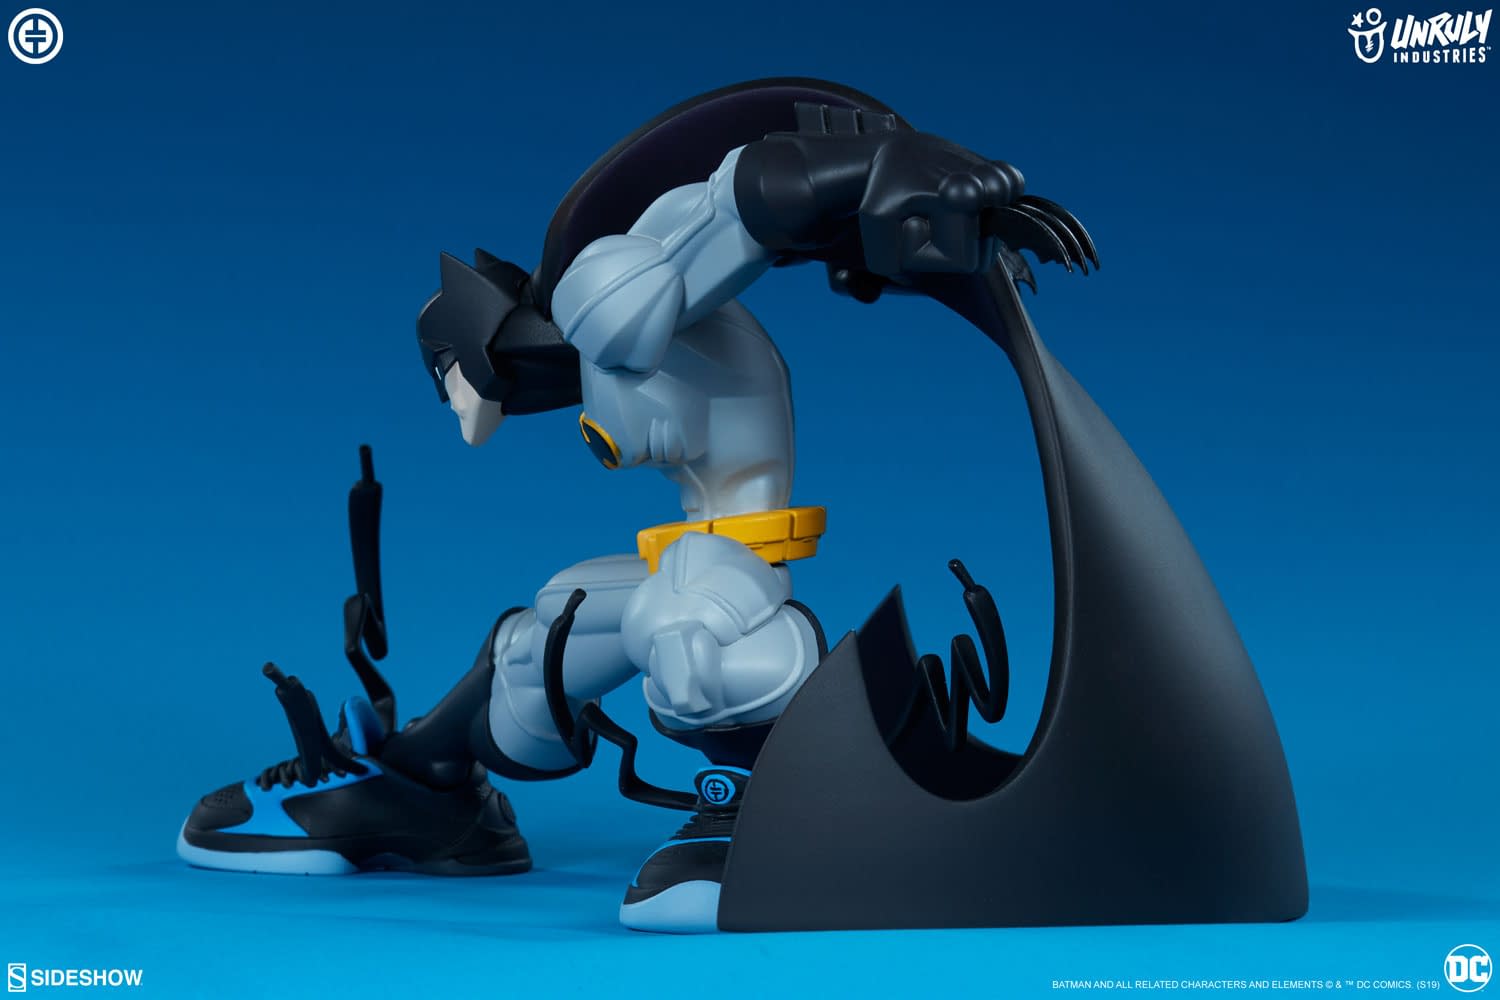 Batman and the Trinity Sport New Kicks in Unruly Industries Statues